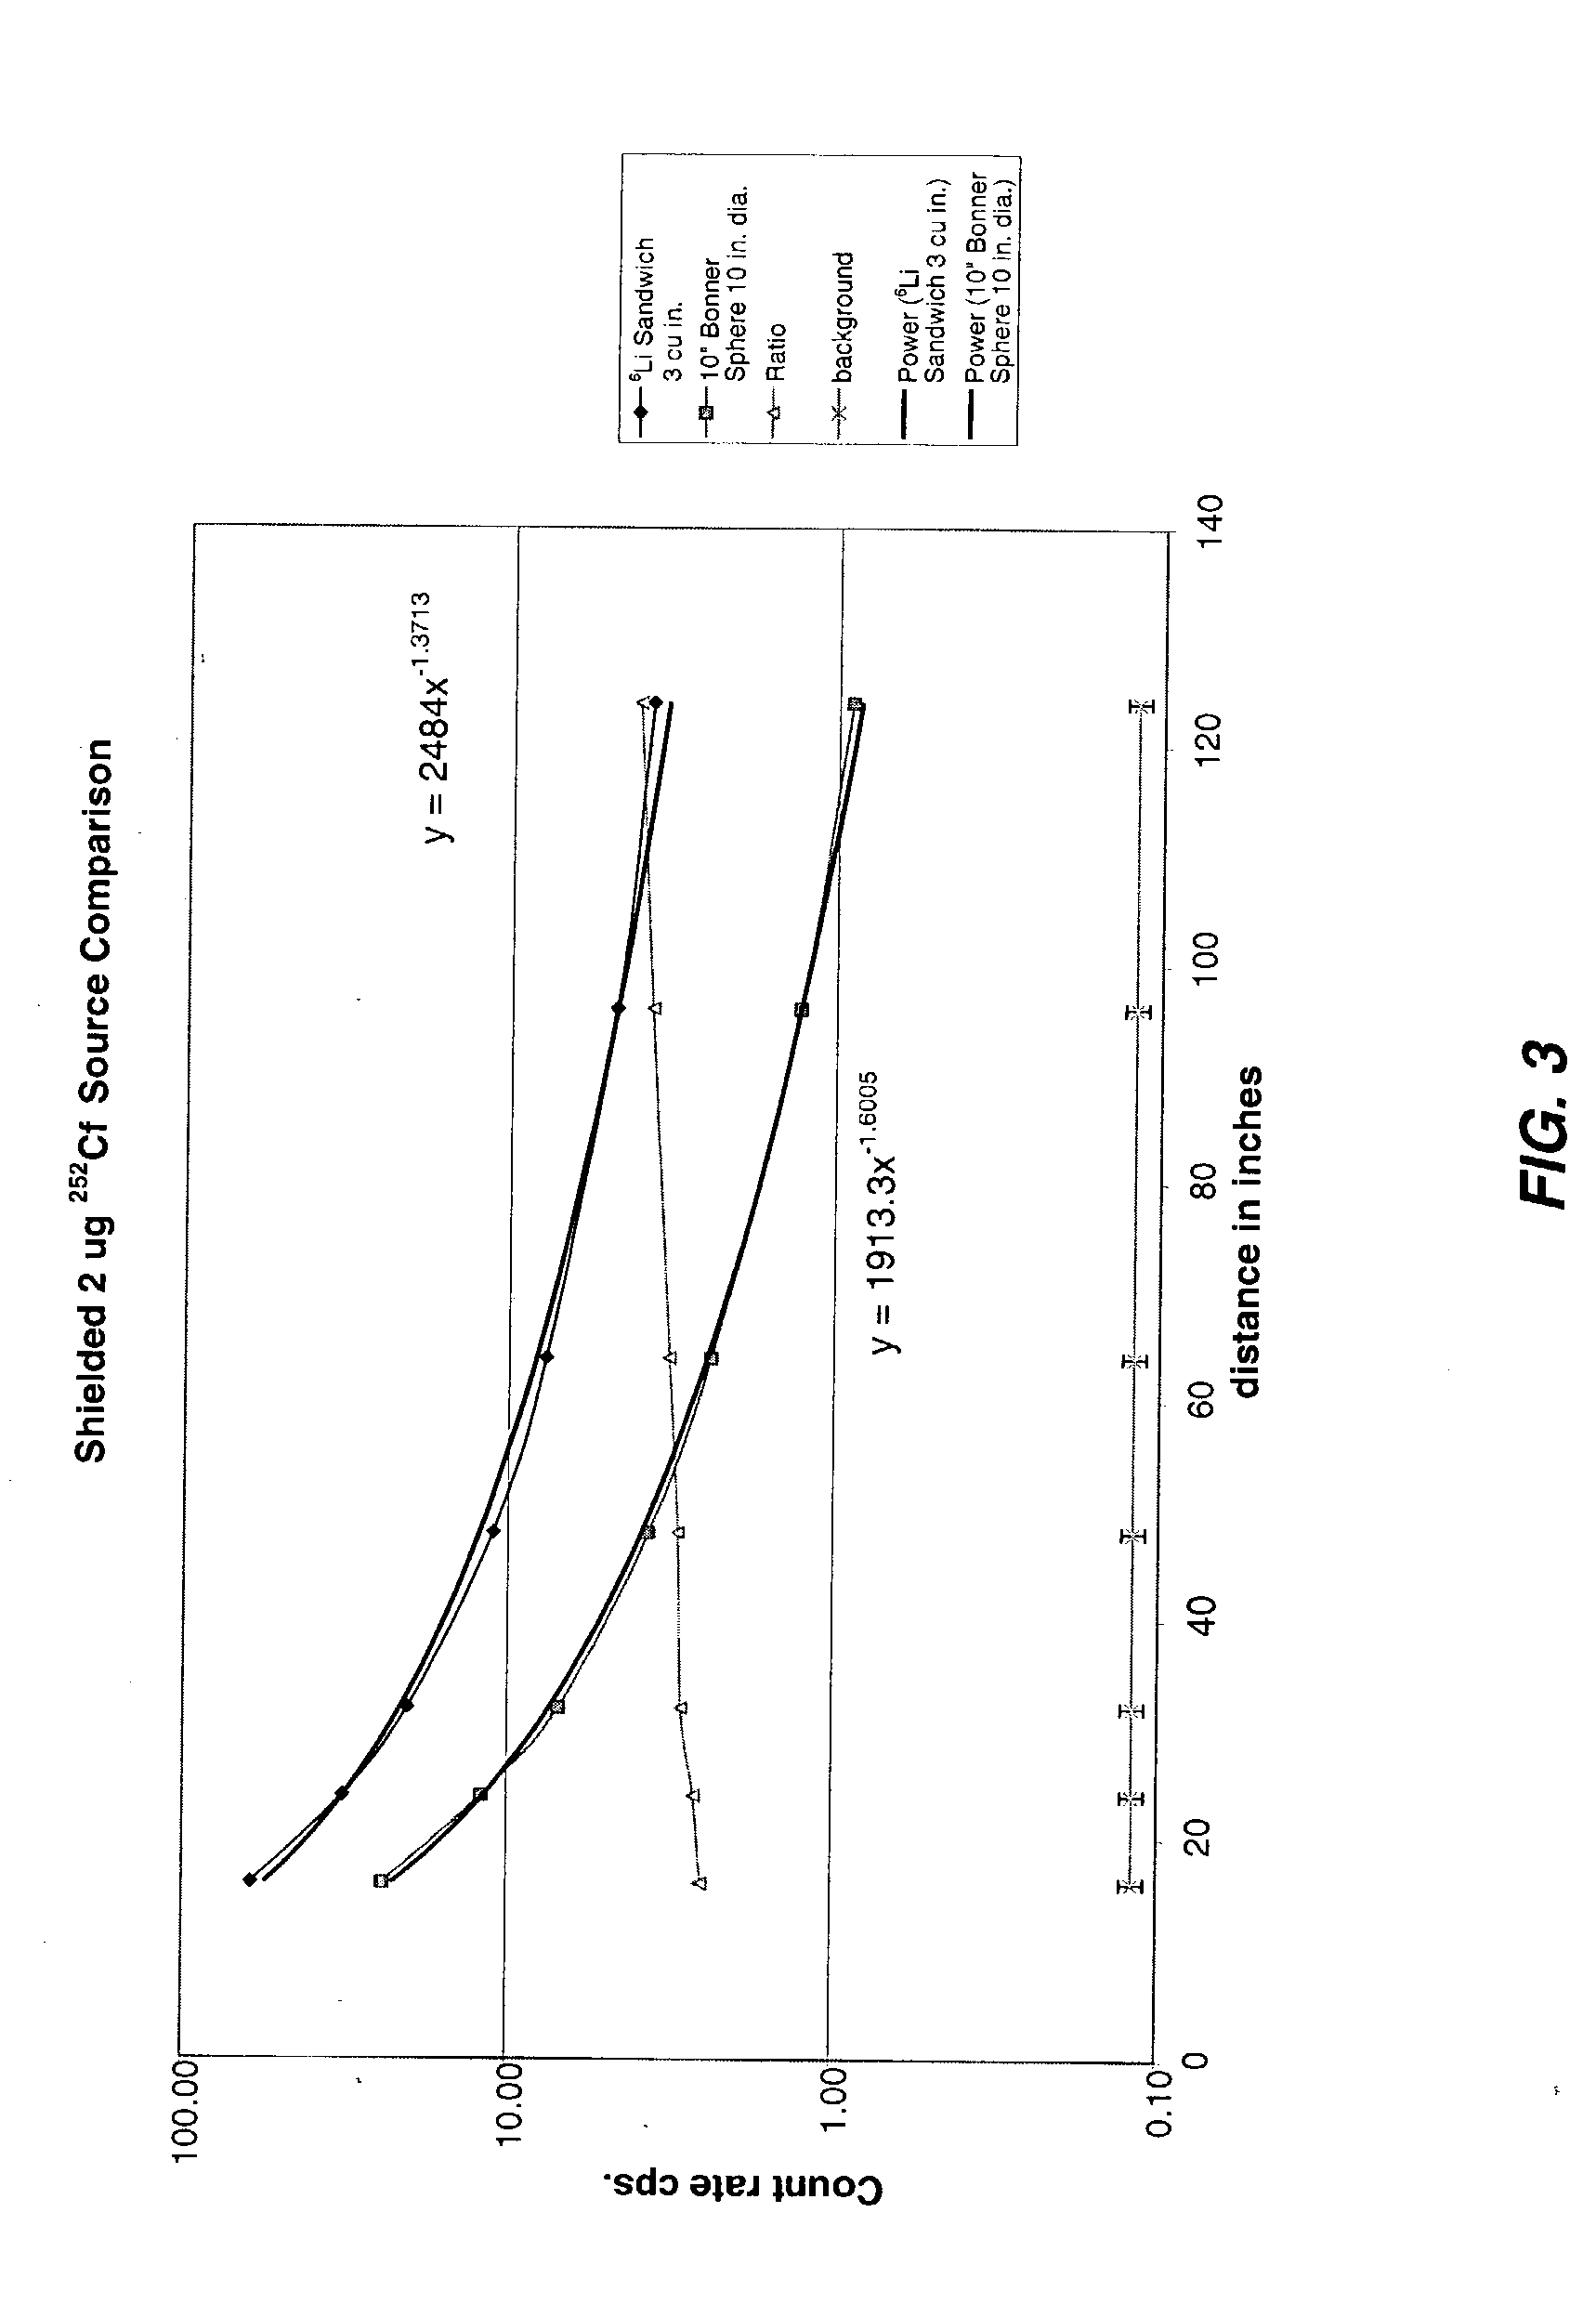 Neutron detector with layered thermal-neutron scintillator and dual function light guide and thermalizing media